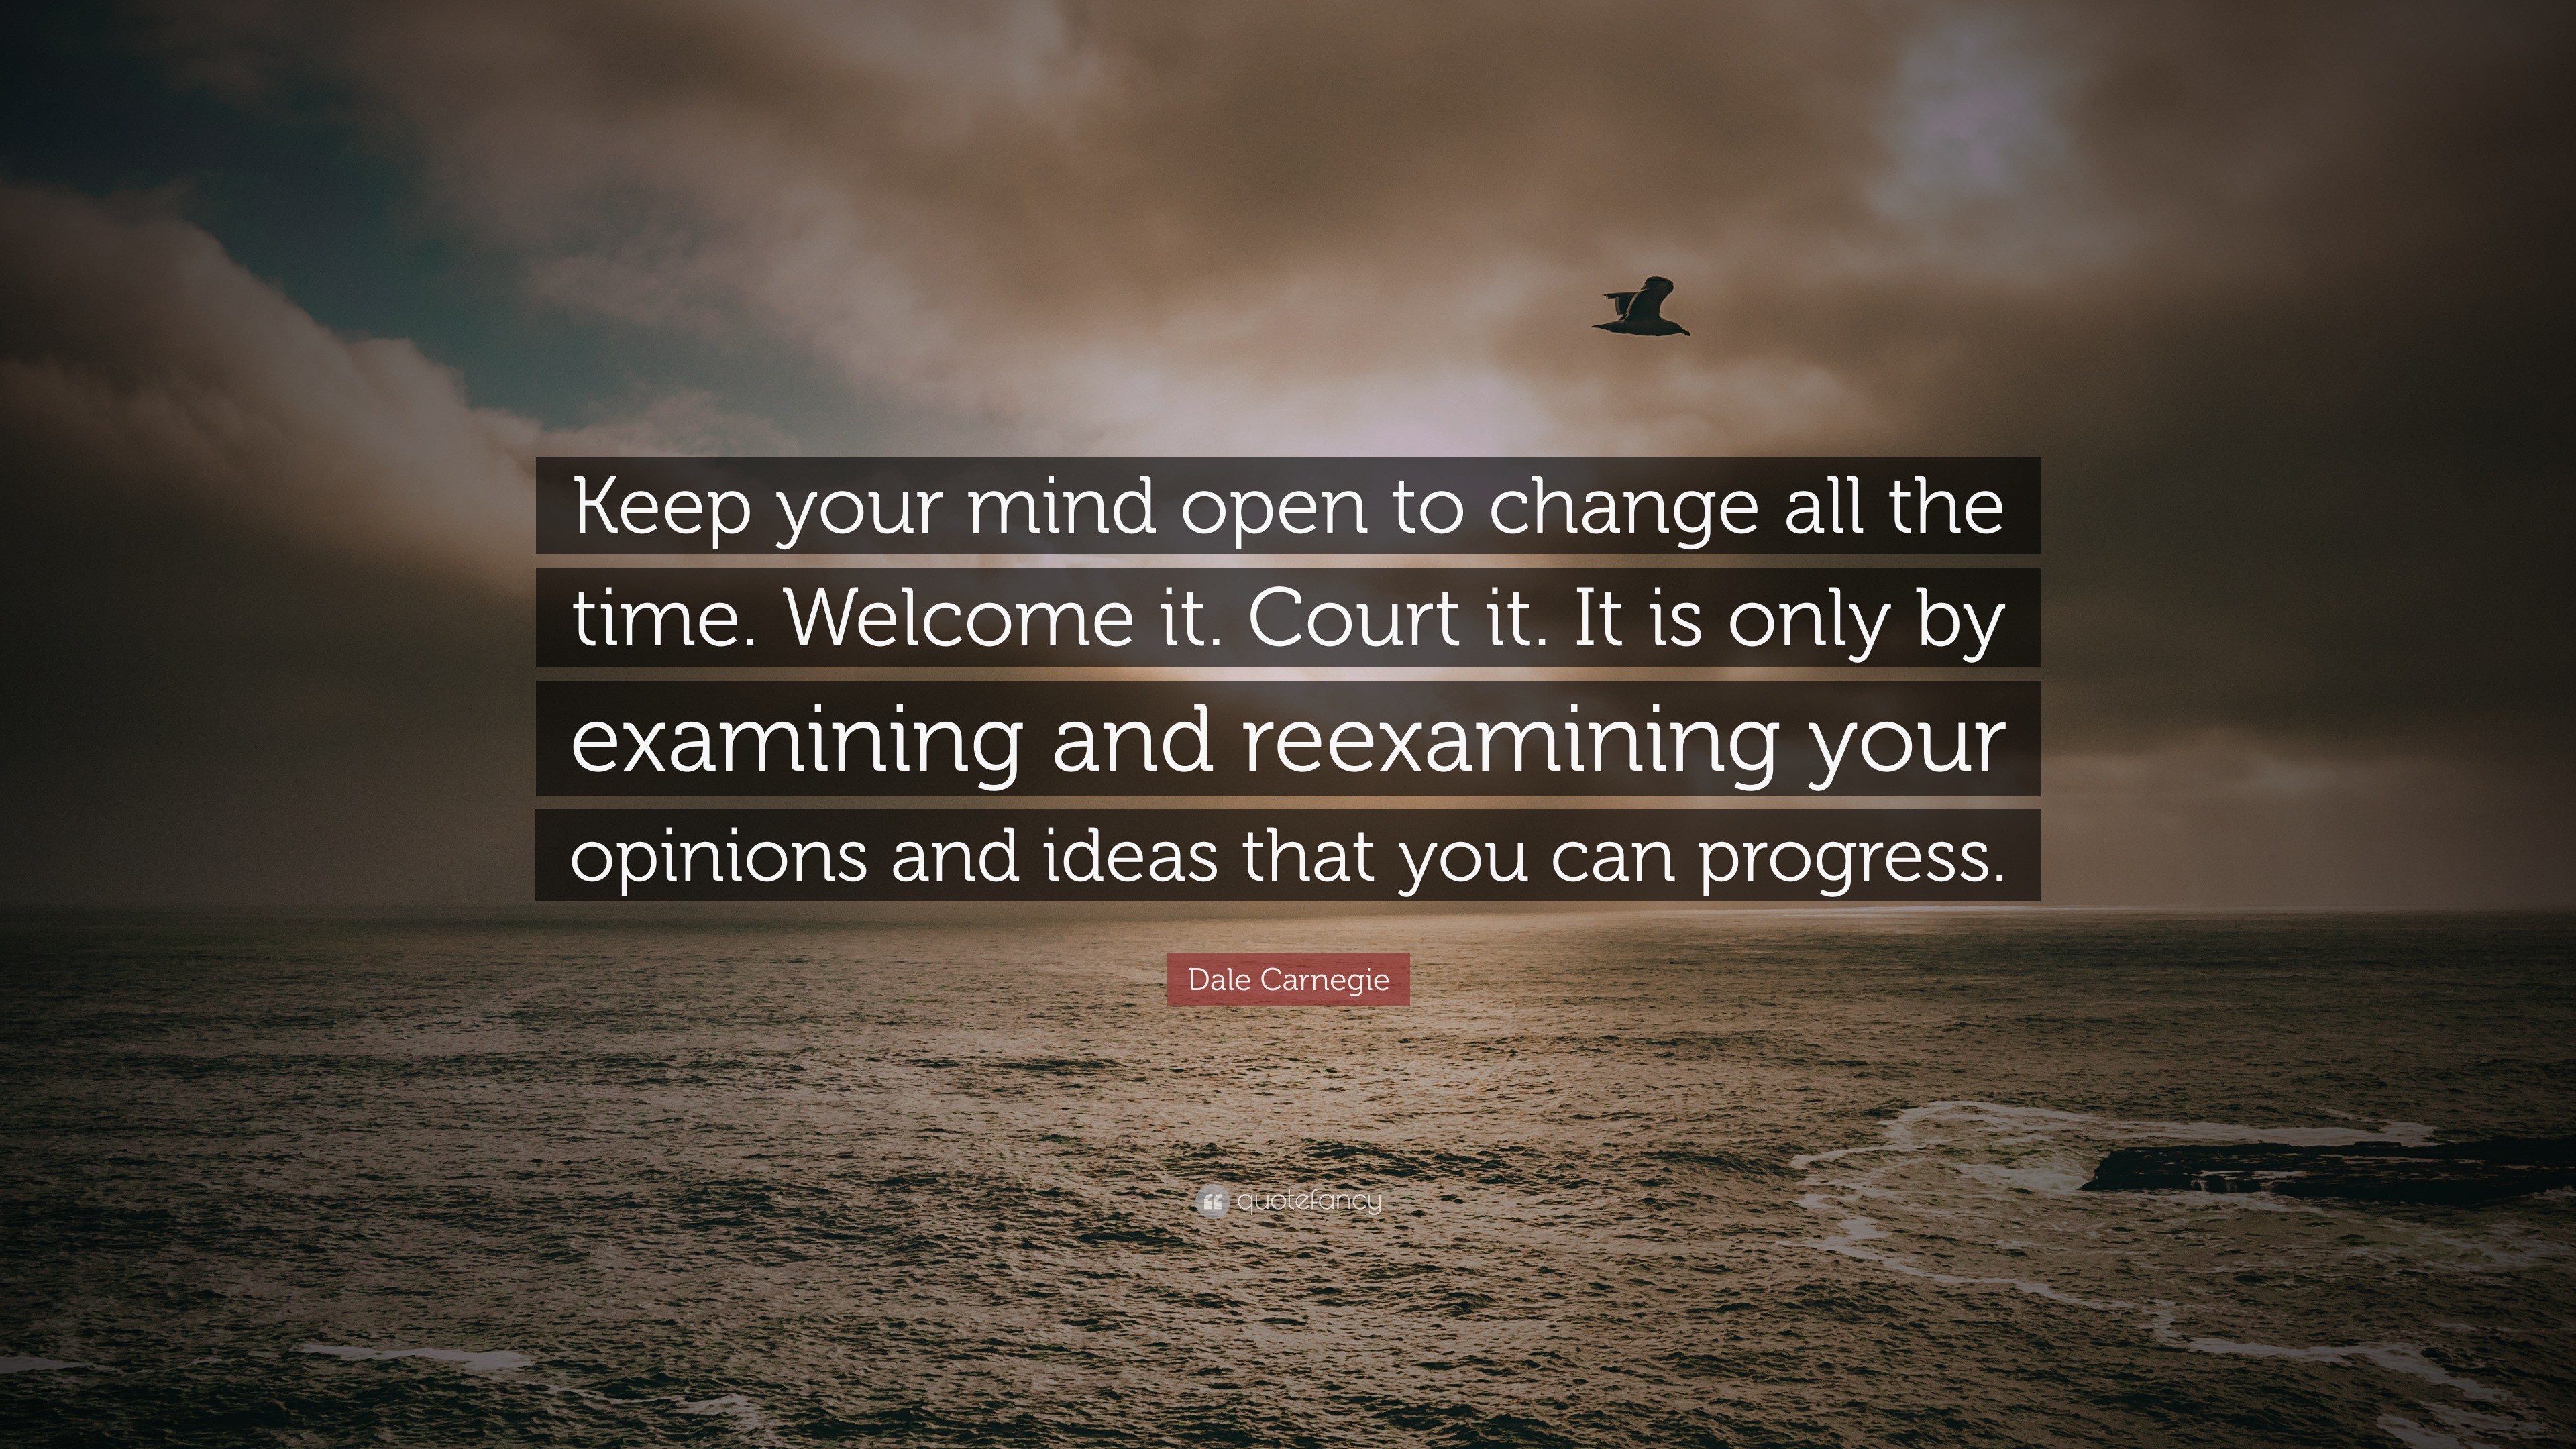 Dale Carnegie Quote: “Keep your mind open to change all the time ...